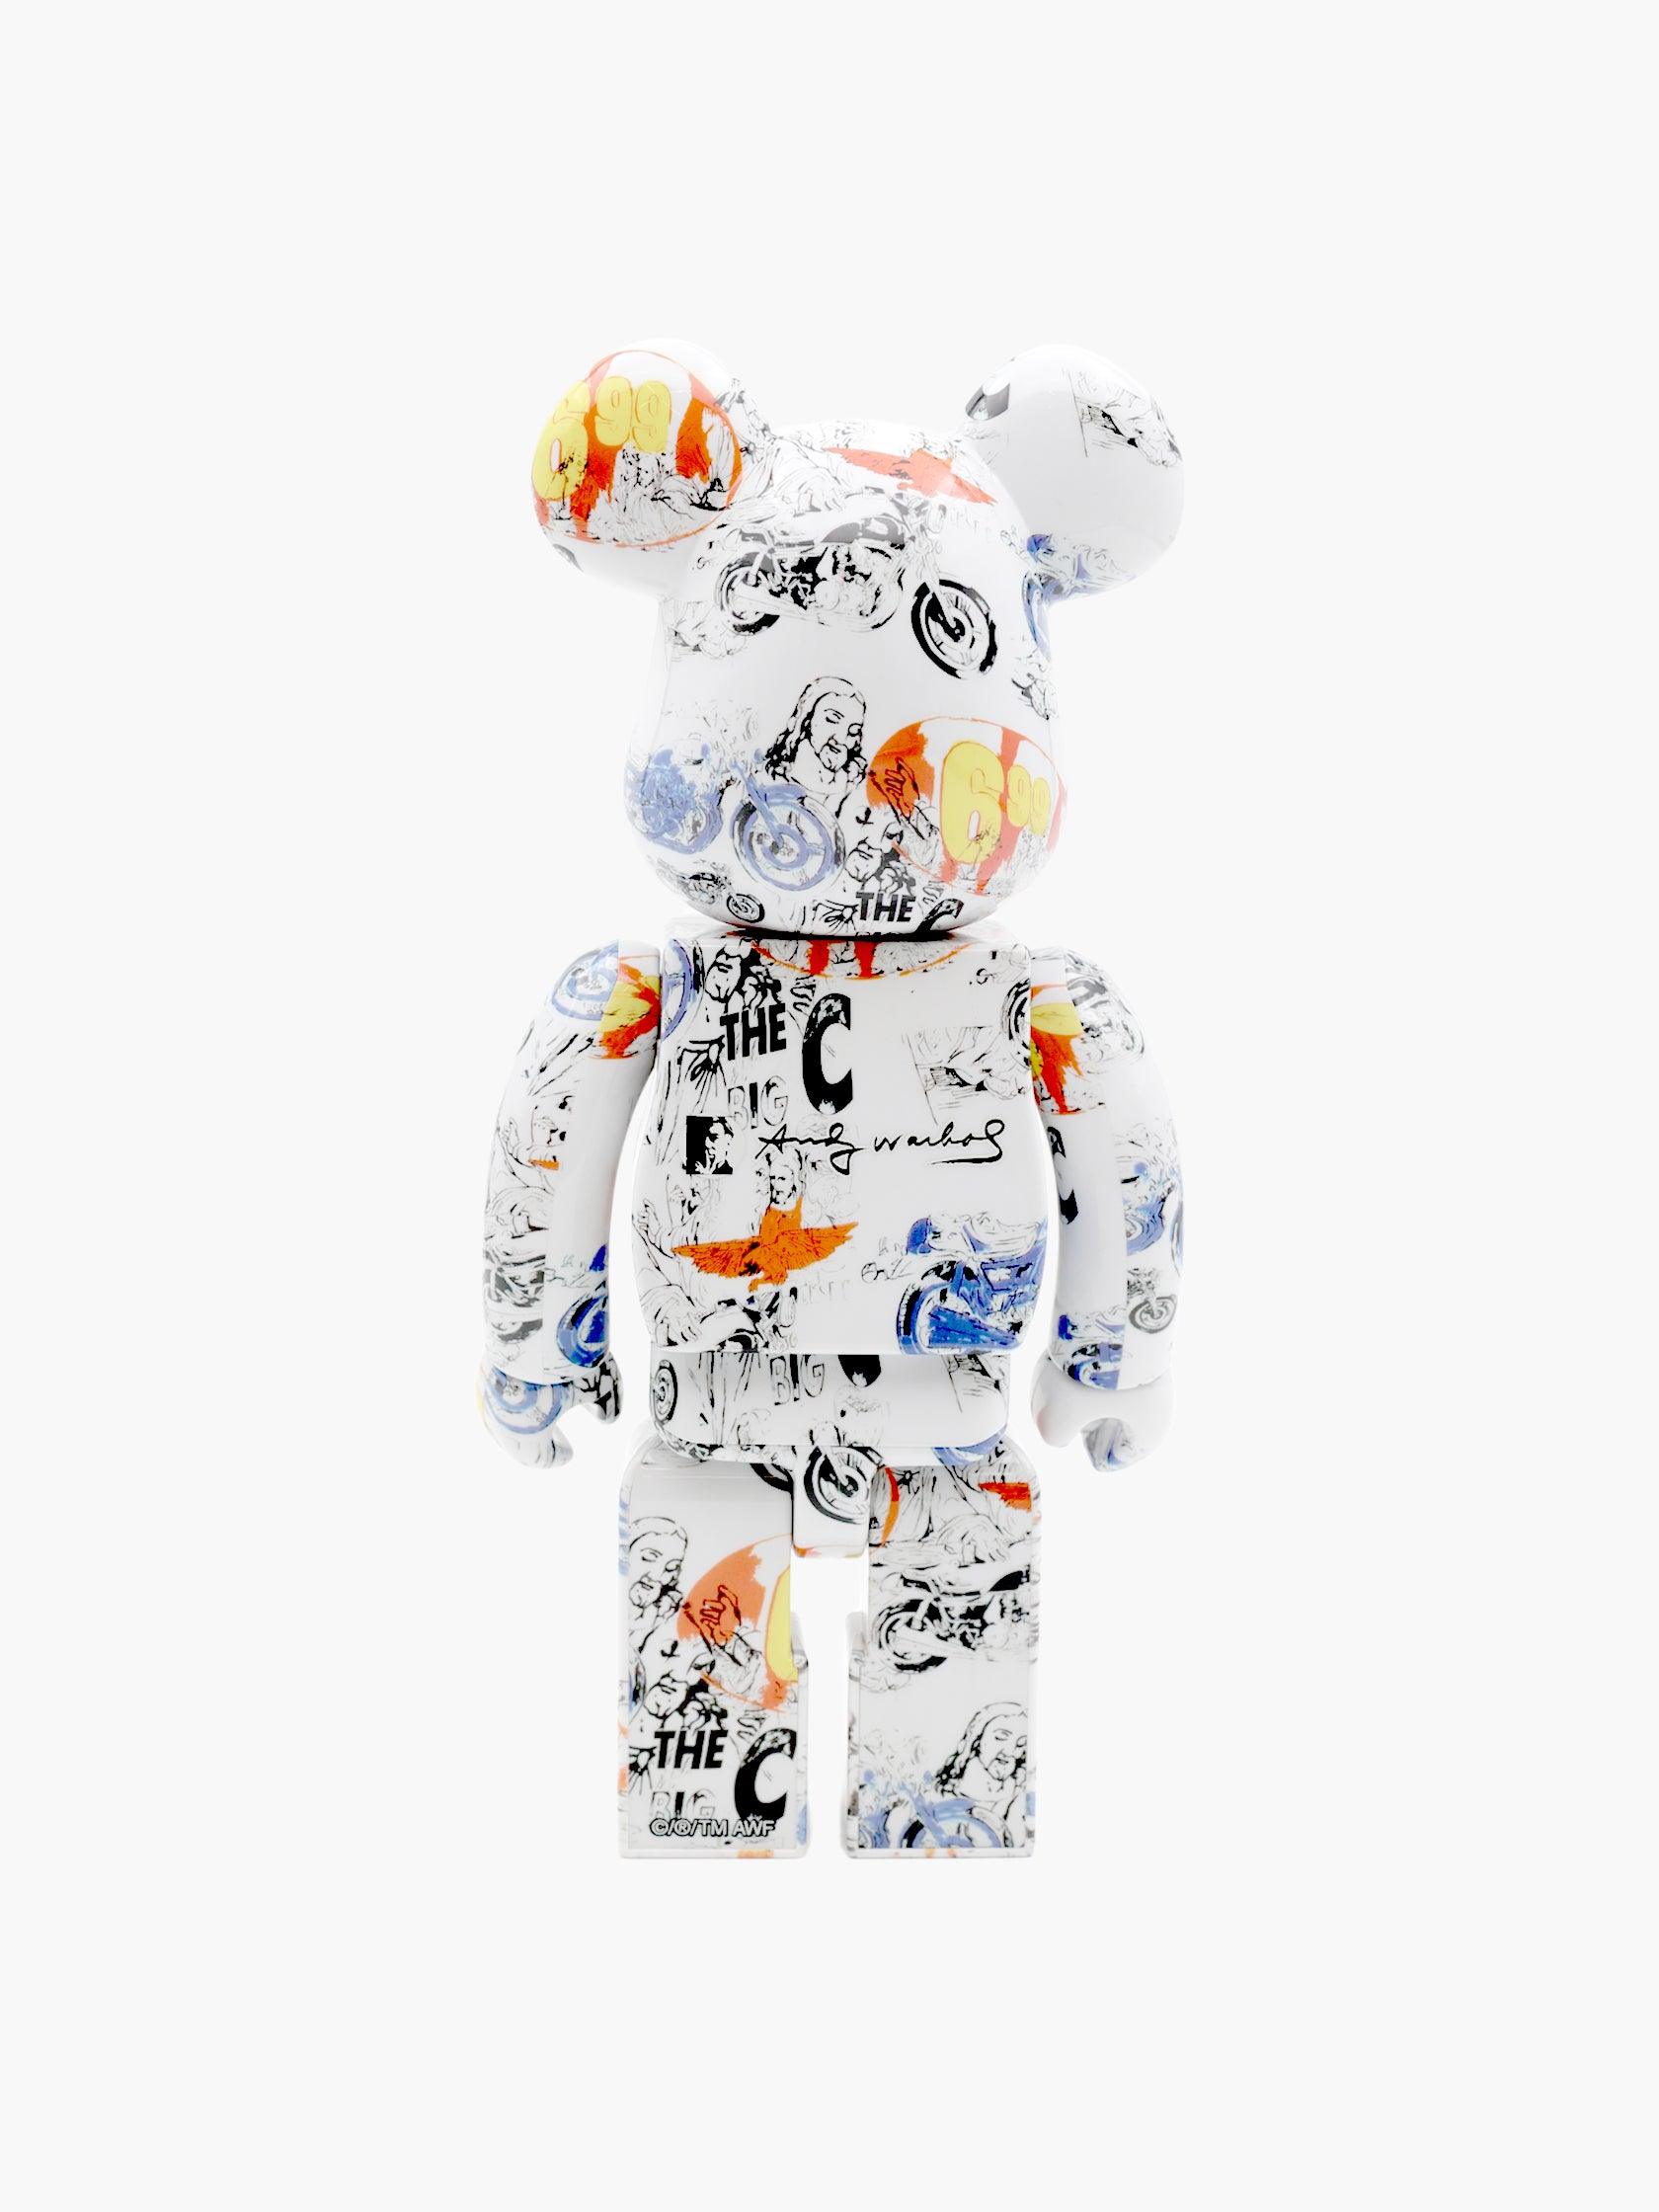 BE@RBRICK Andy Warhol The Last Supper The Big C 1000% by Medicom Toy - Mankovsky Gallery